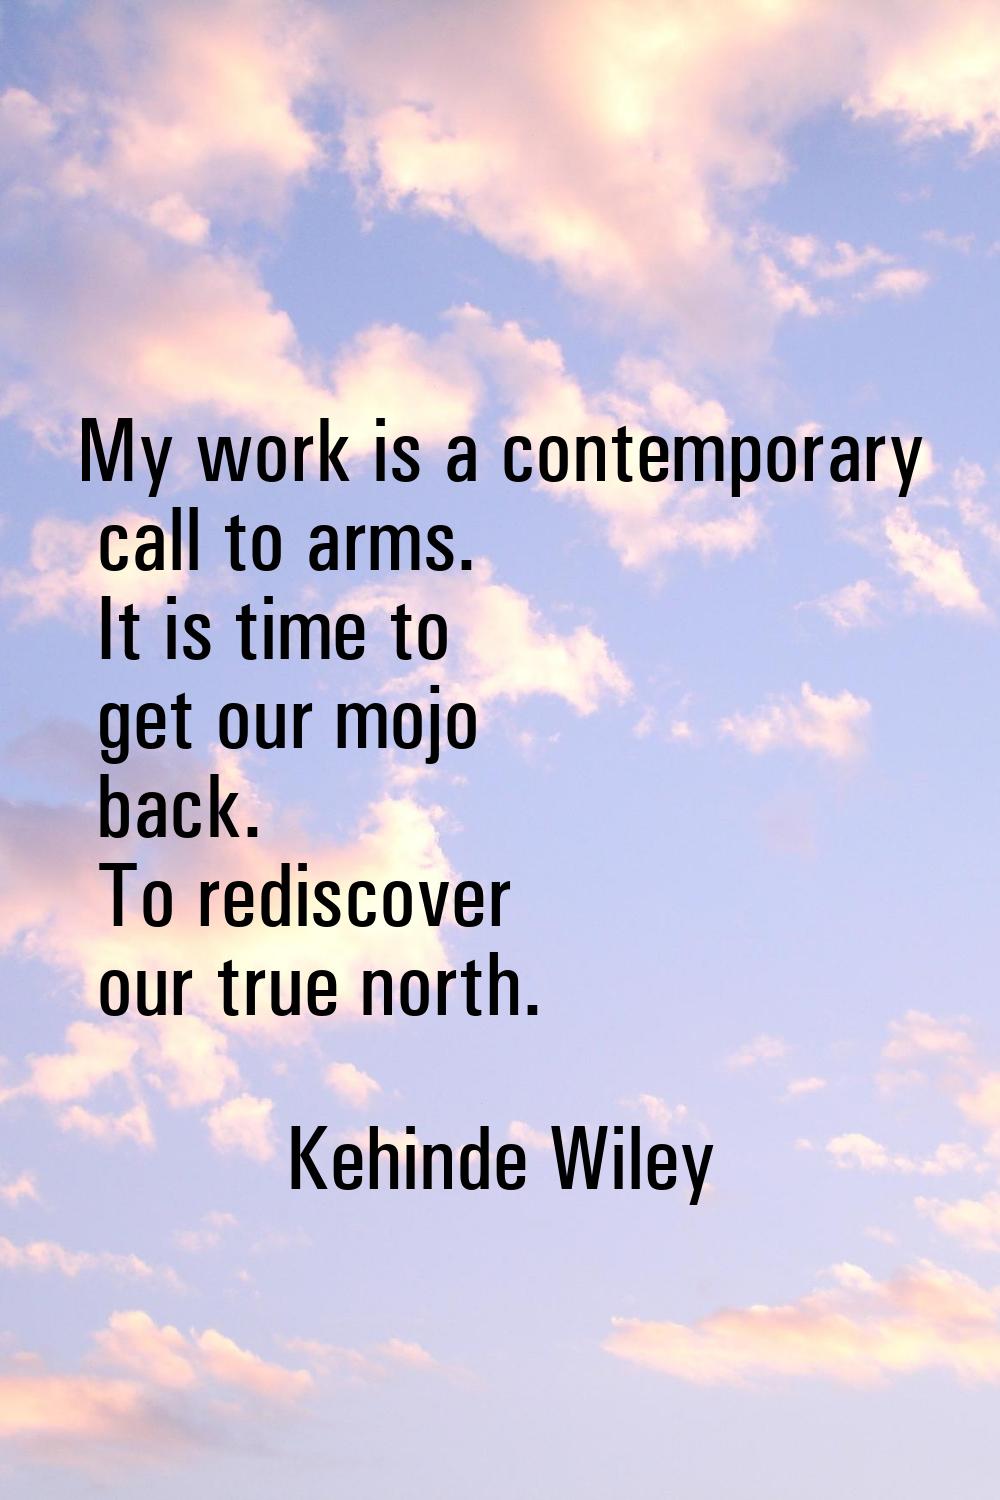 My work is a contemporary call to arms. It is time to get our mojo back. To rediscover our true nor